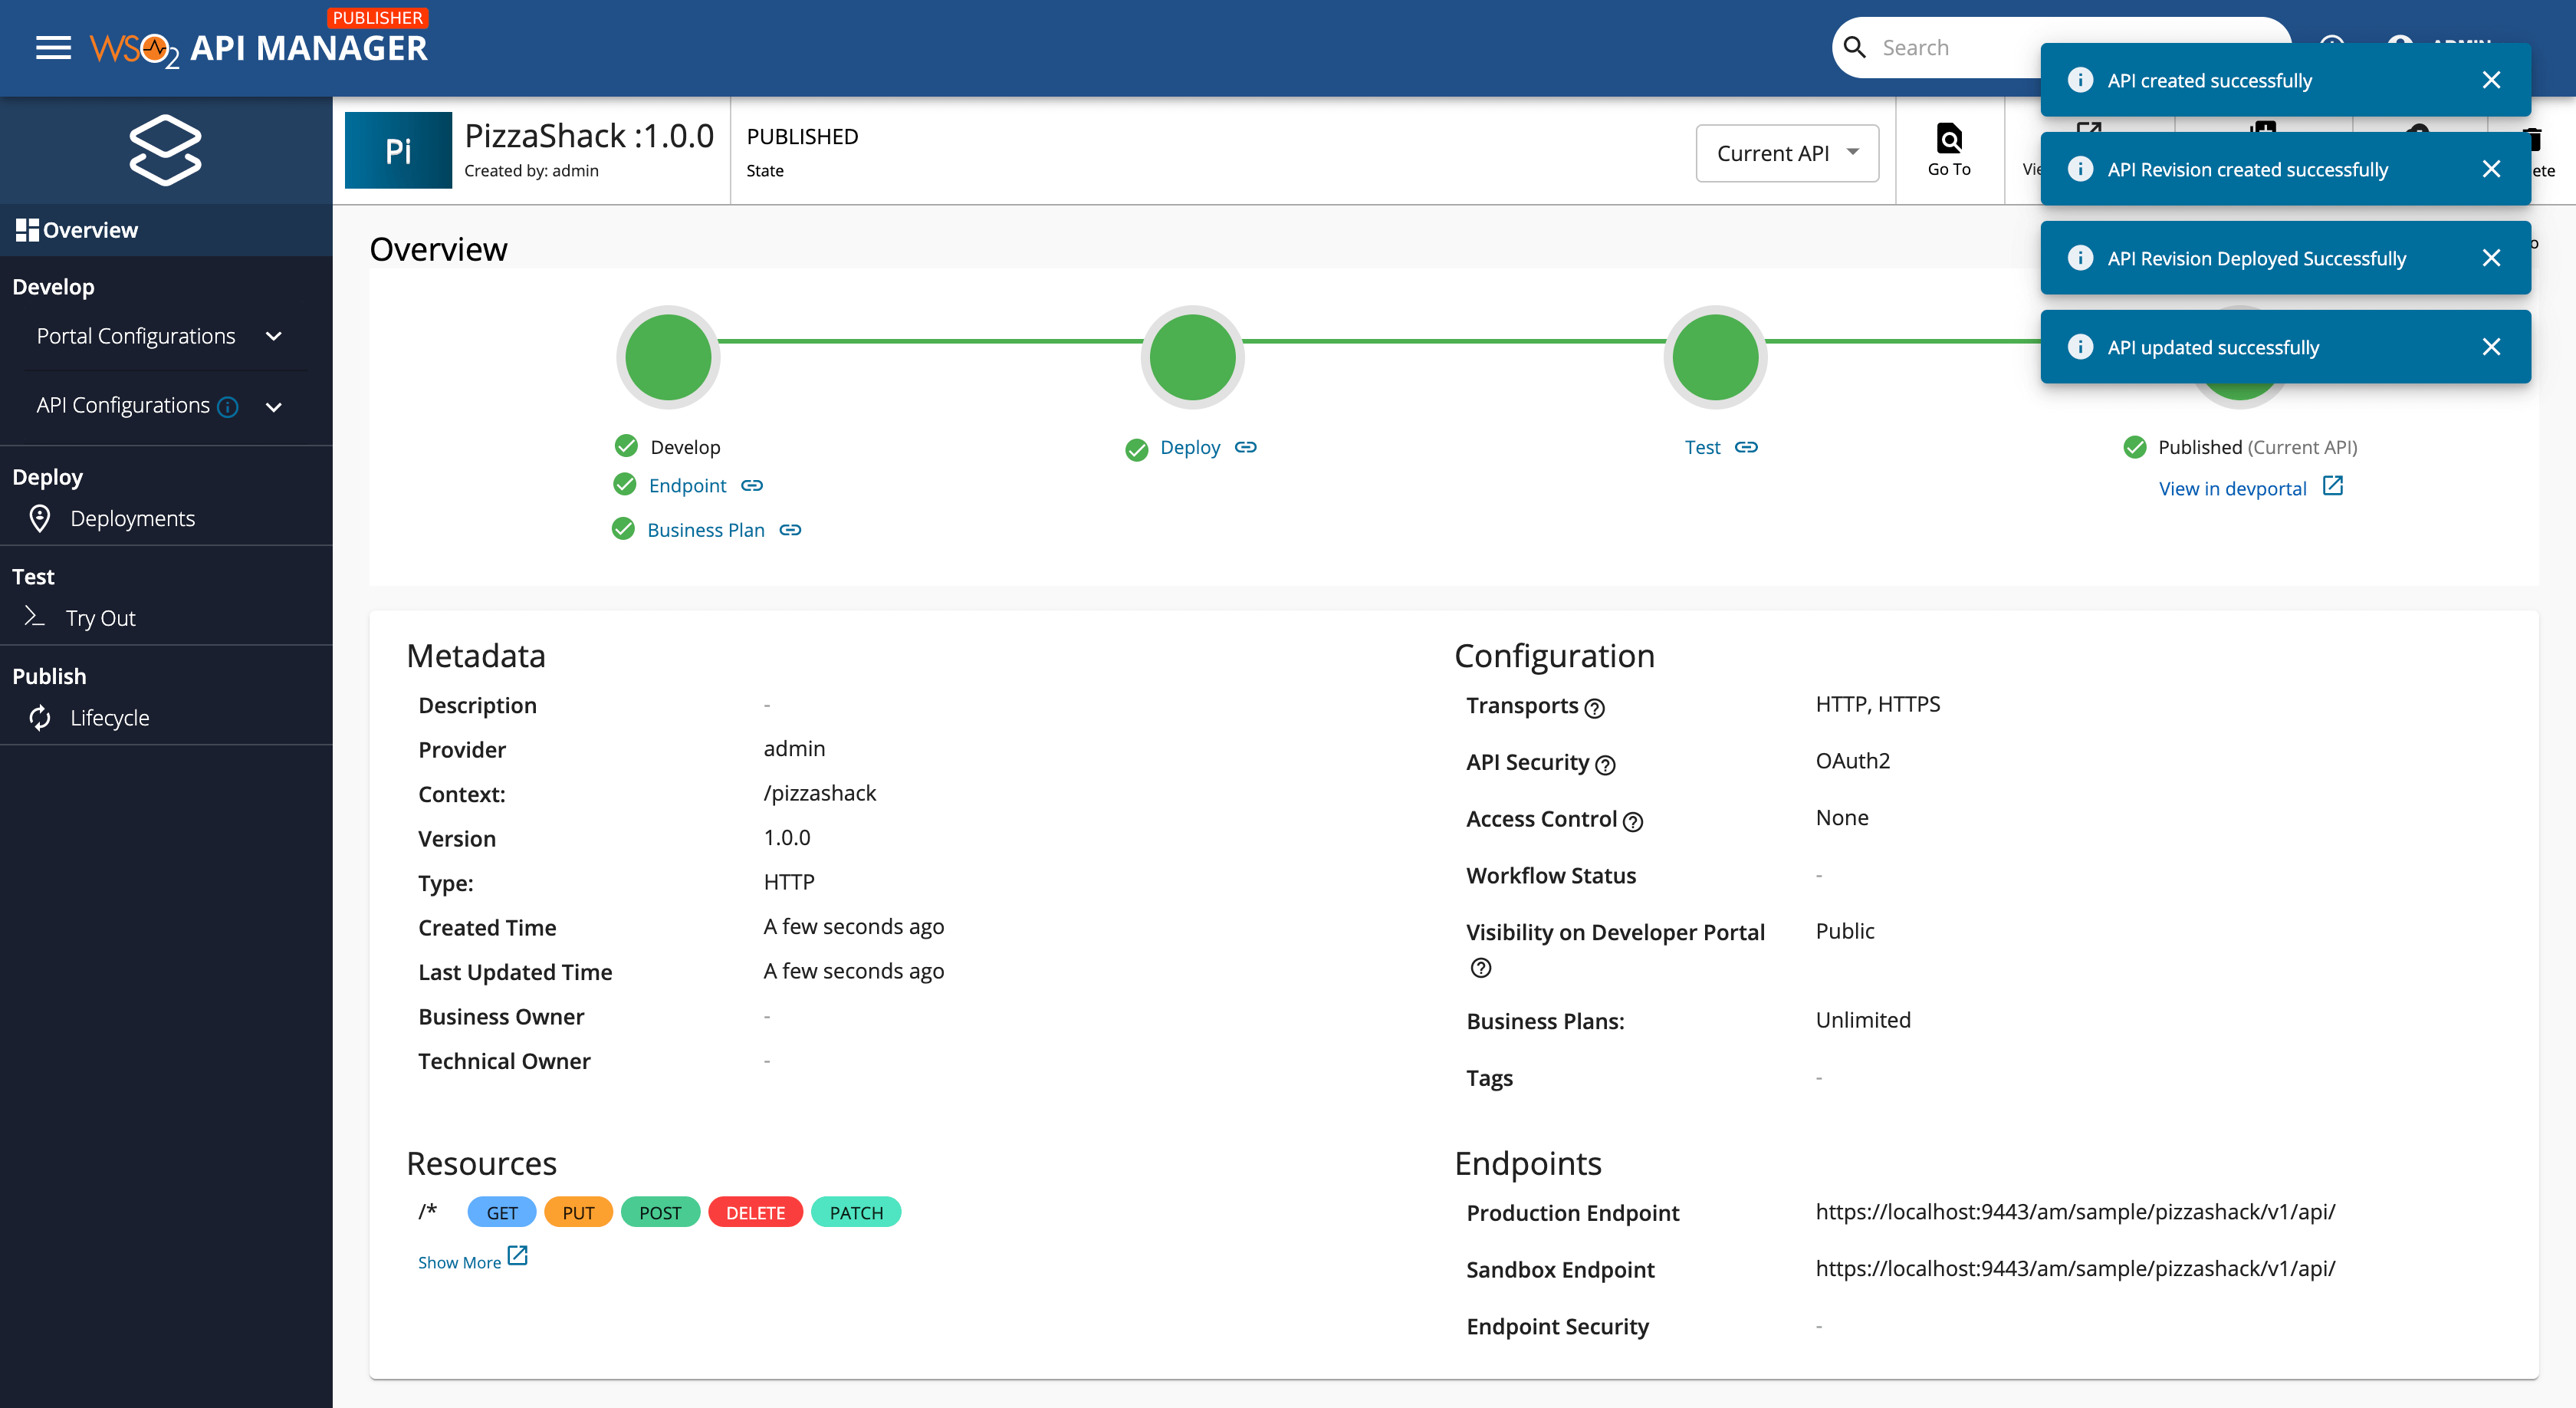 API overview page